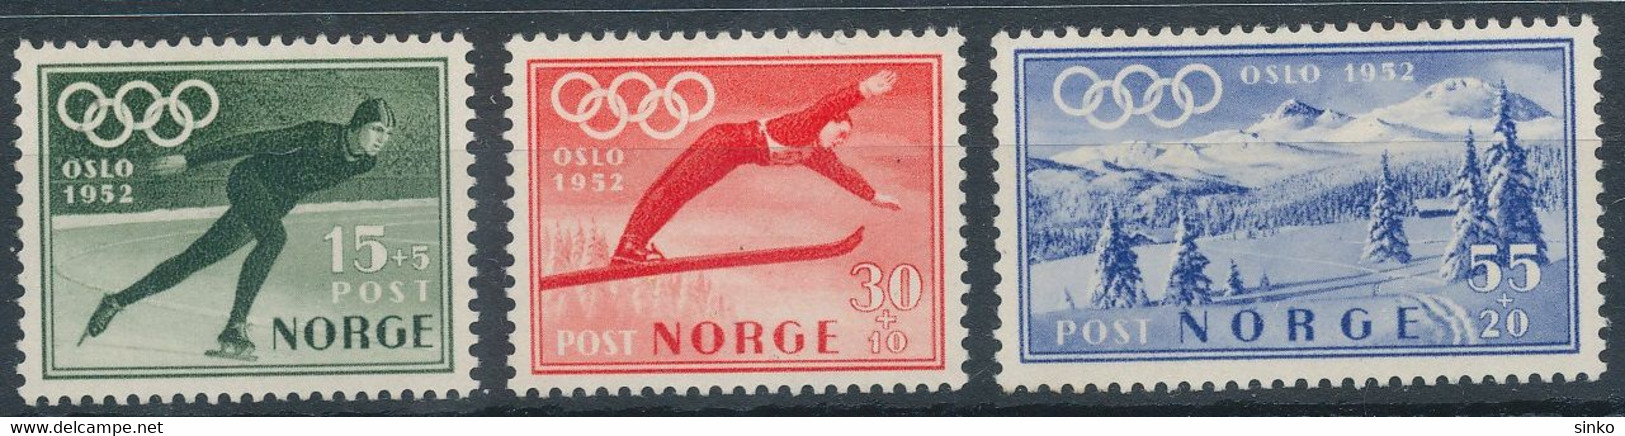 1952. Norway - Olympic Games - Hiver 1952: Oslo